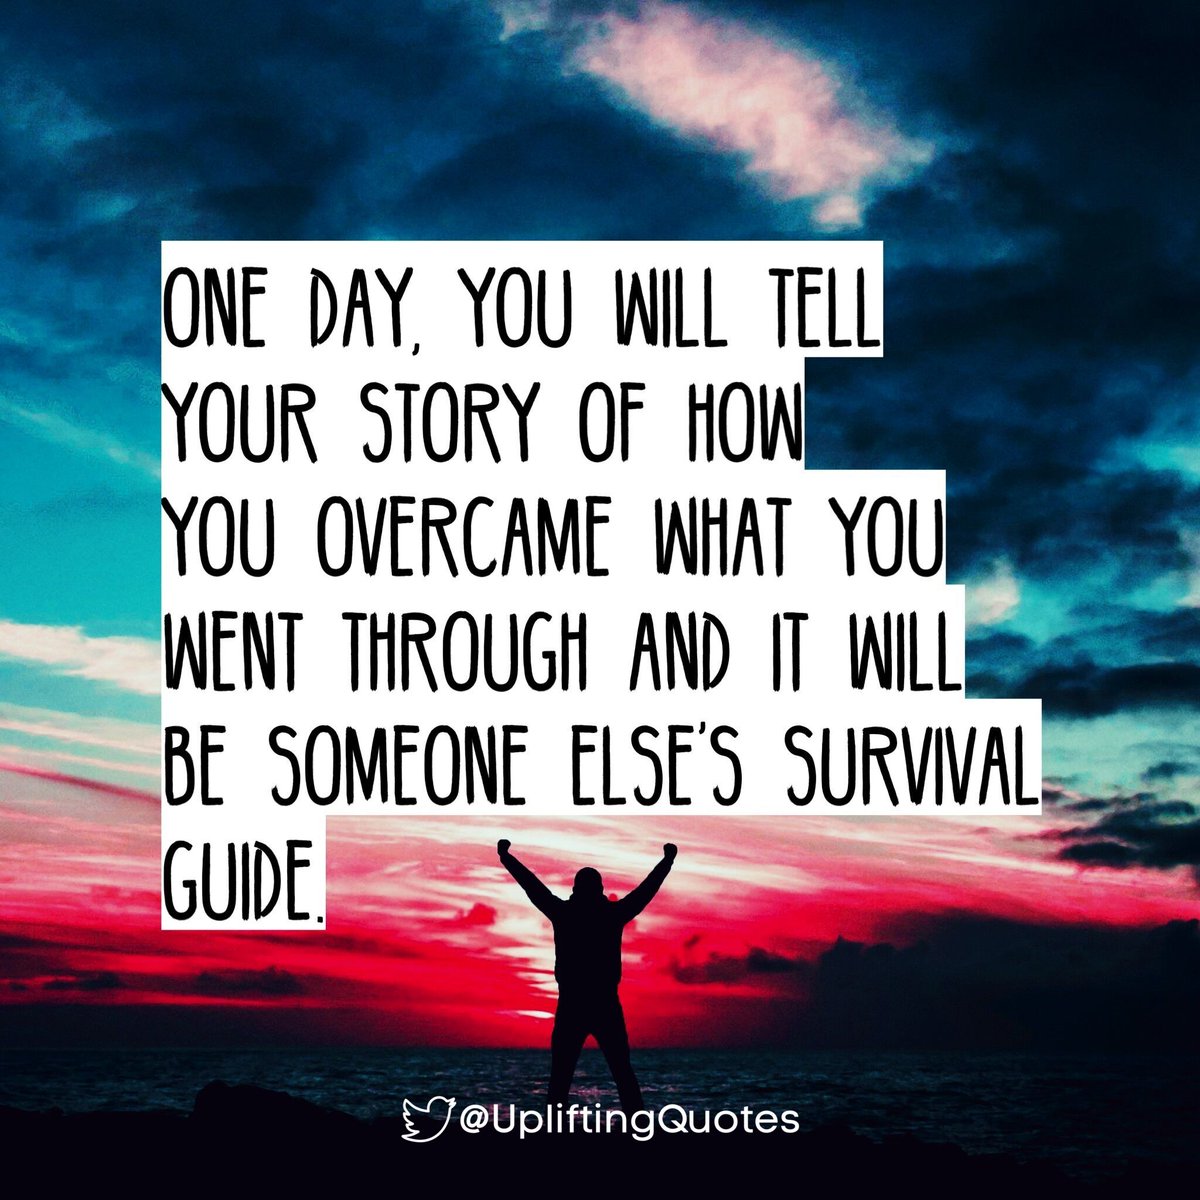 One day, you will tell your story of how you overcame what you went through and it will be someone else's survival guide.